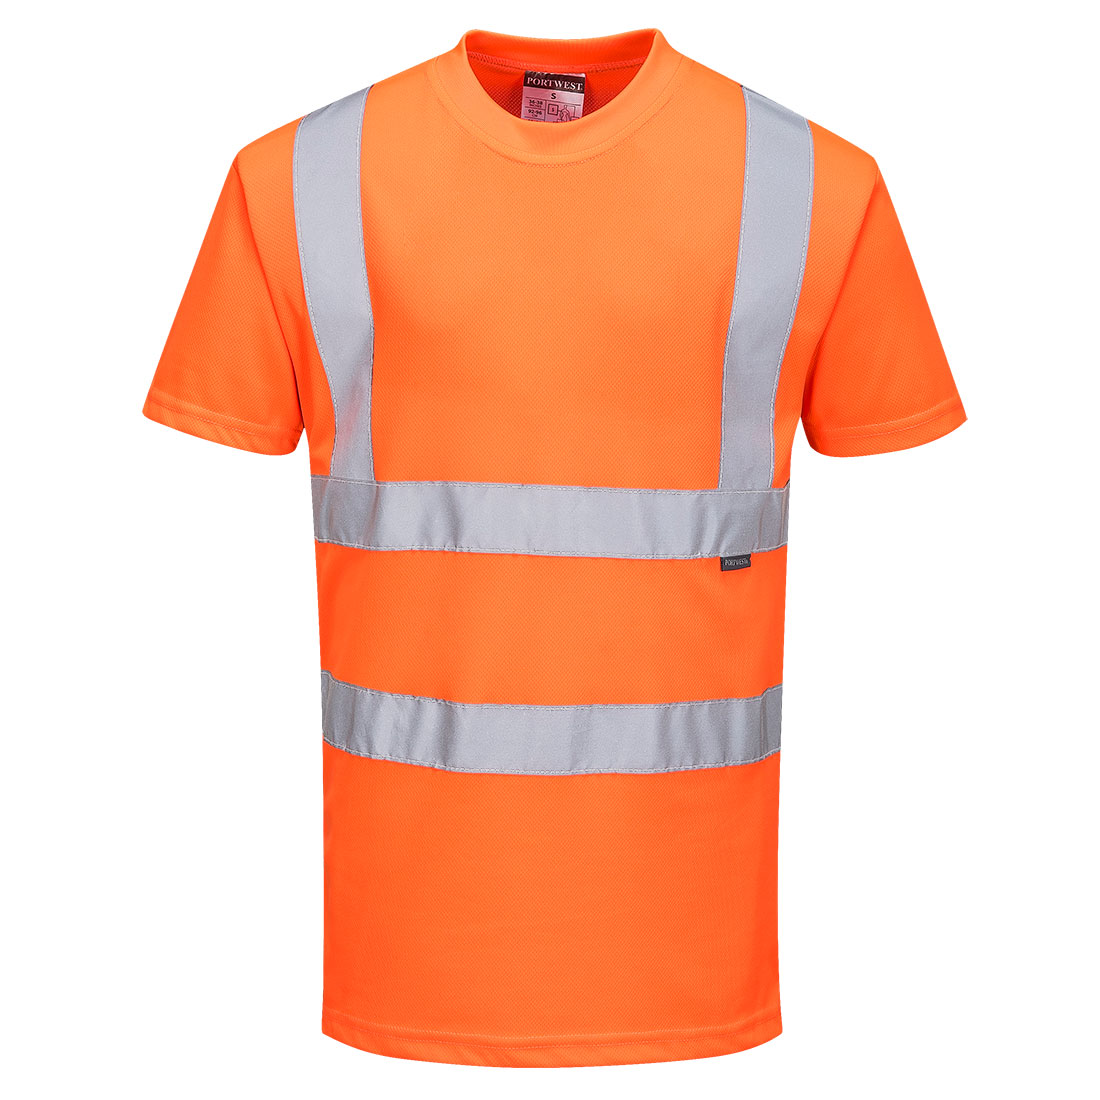 How Does UV Protective Clothing Work